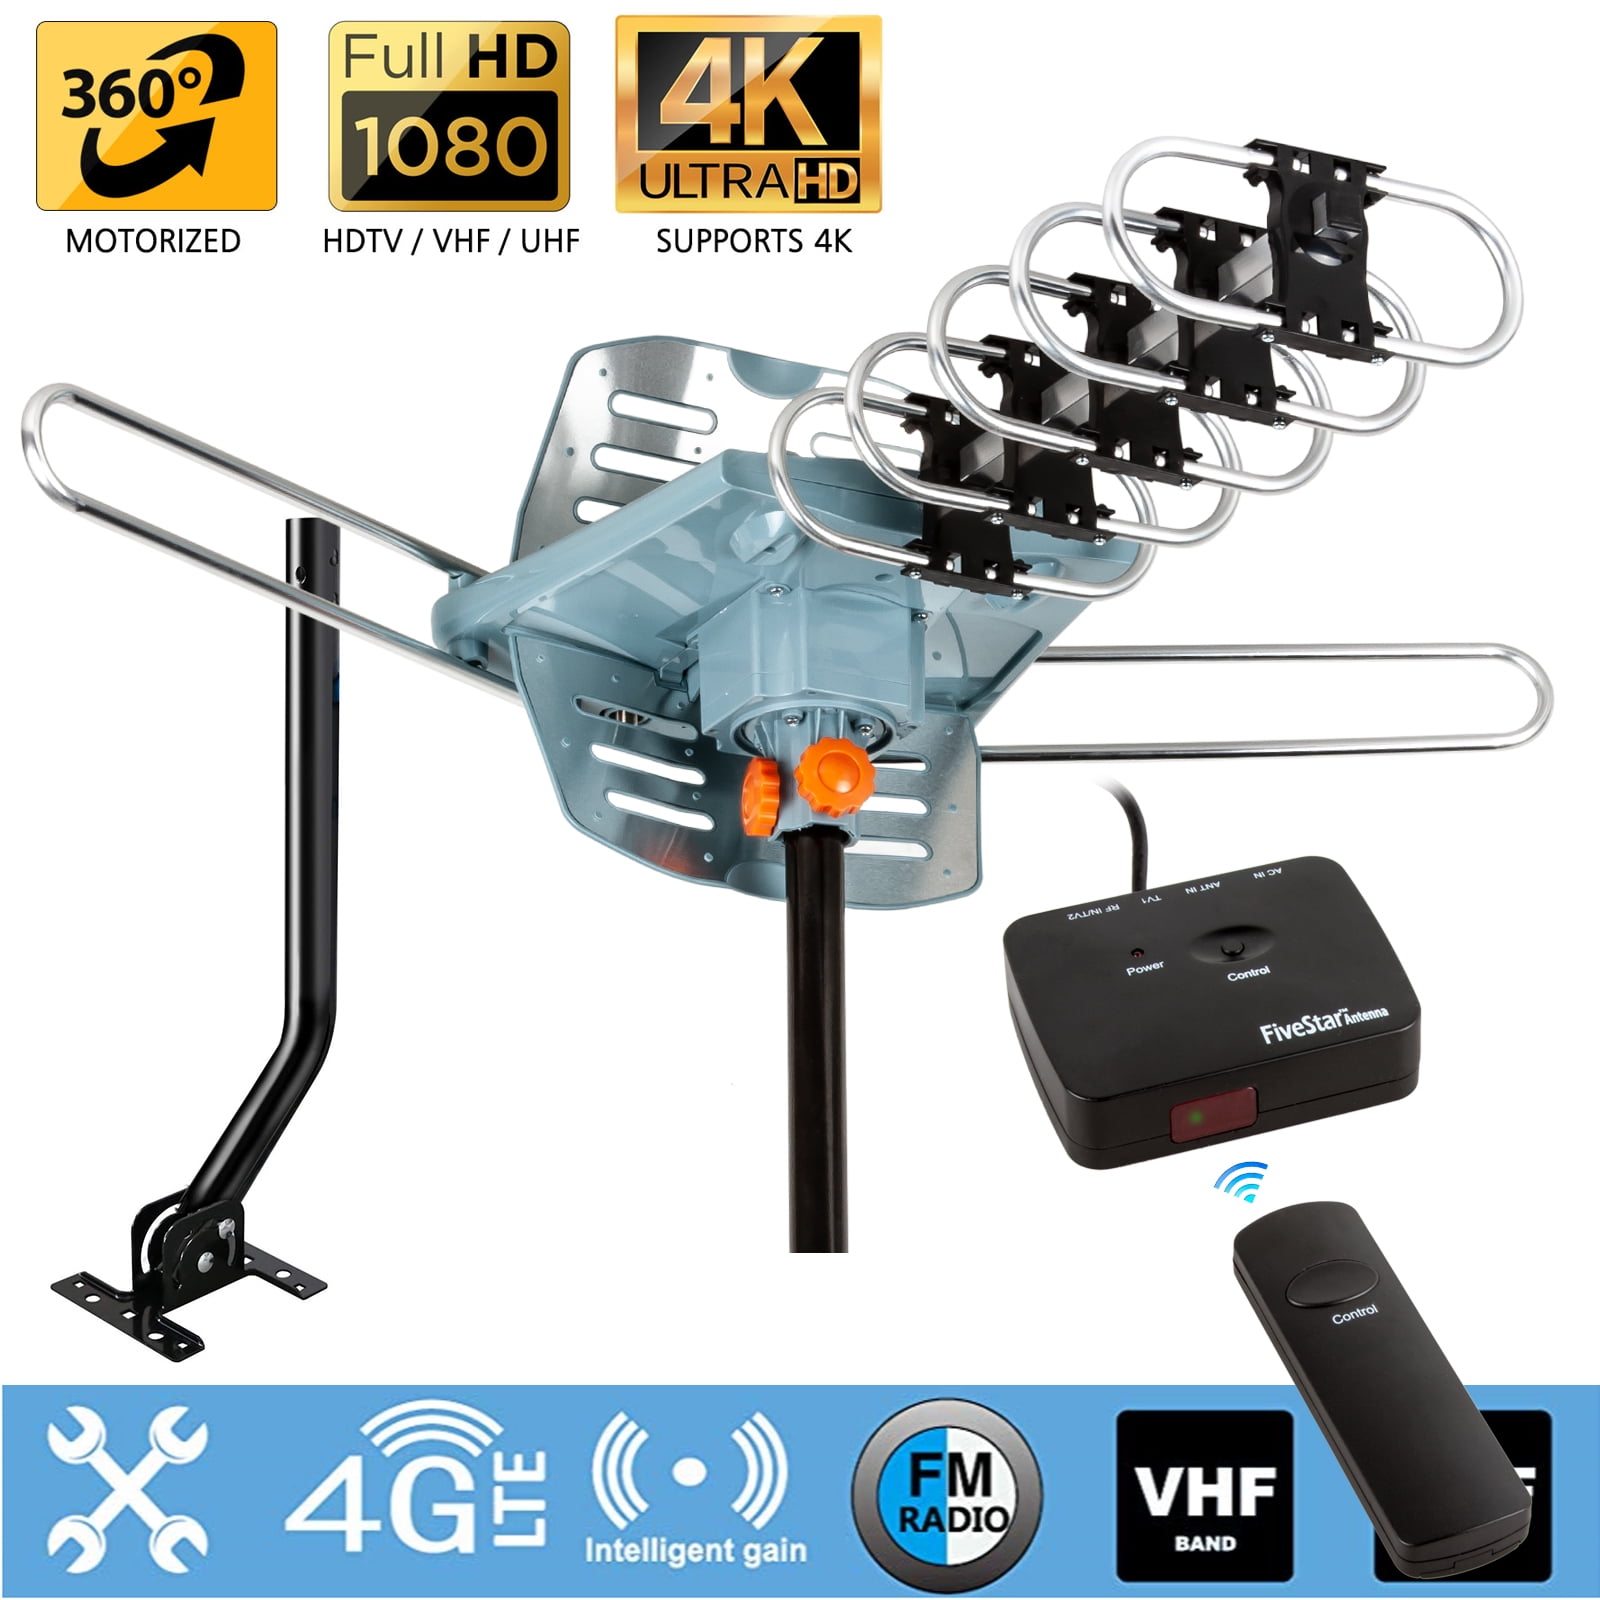 360 DEGREE HDTV DIGITAL AMPLIFIED OUTDOOR DH TV ANTENNA HD VHF W/ Bracket&Cable 